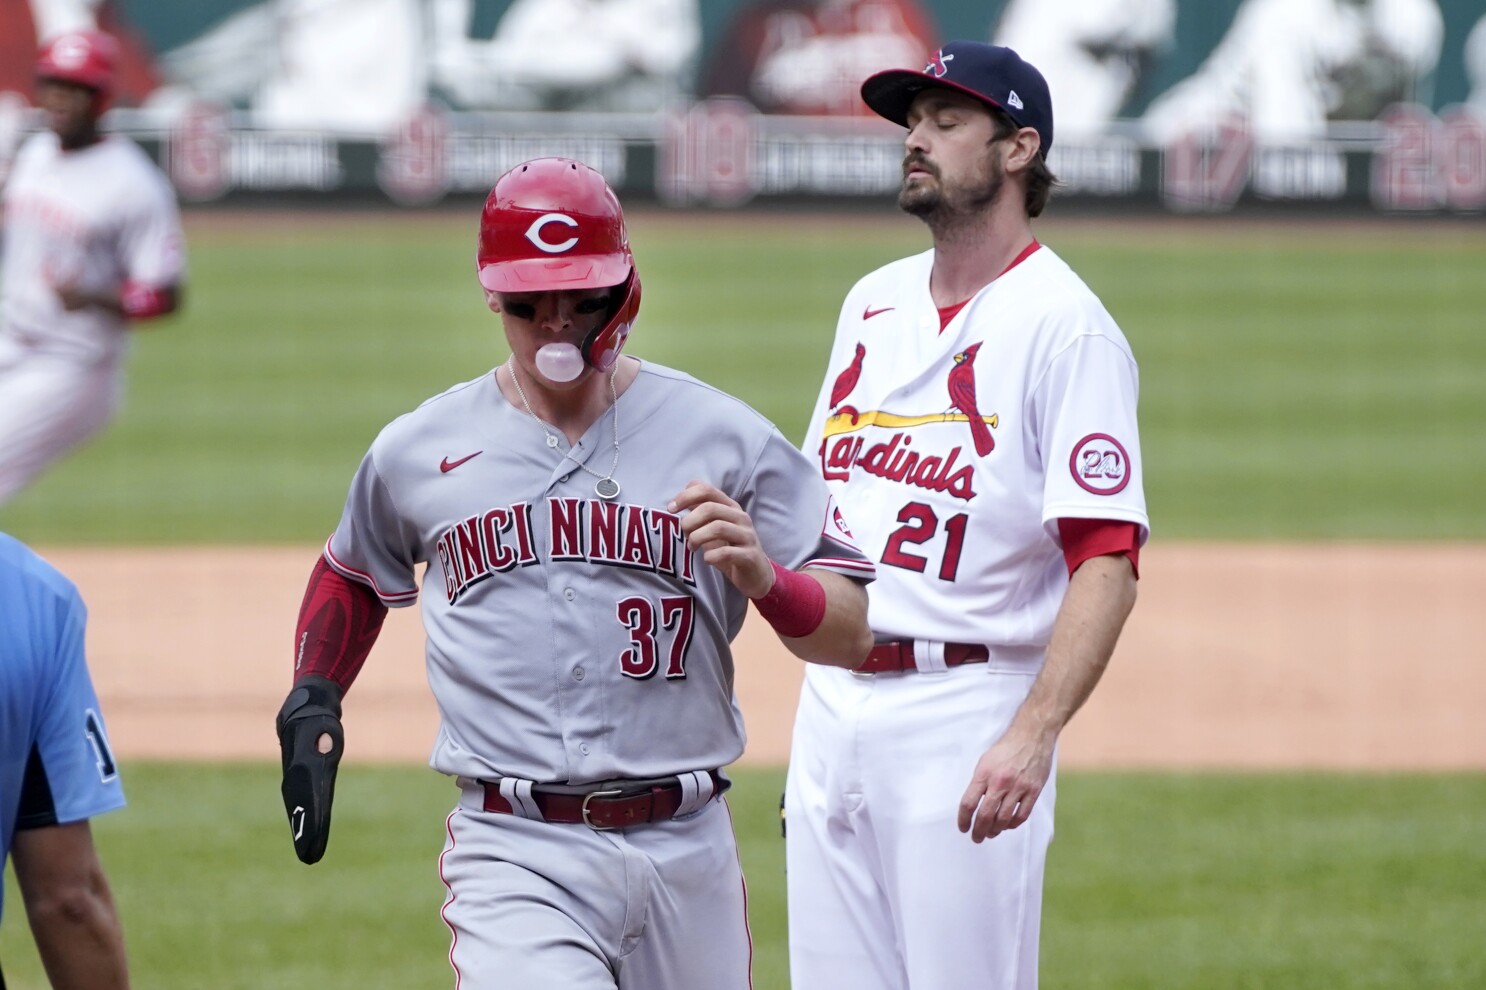 Miller Hit Batter Walk Wild Pitch Lifts Reds Over Cards The San Diego Union Tribune